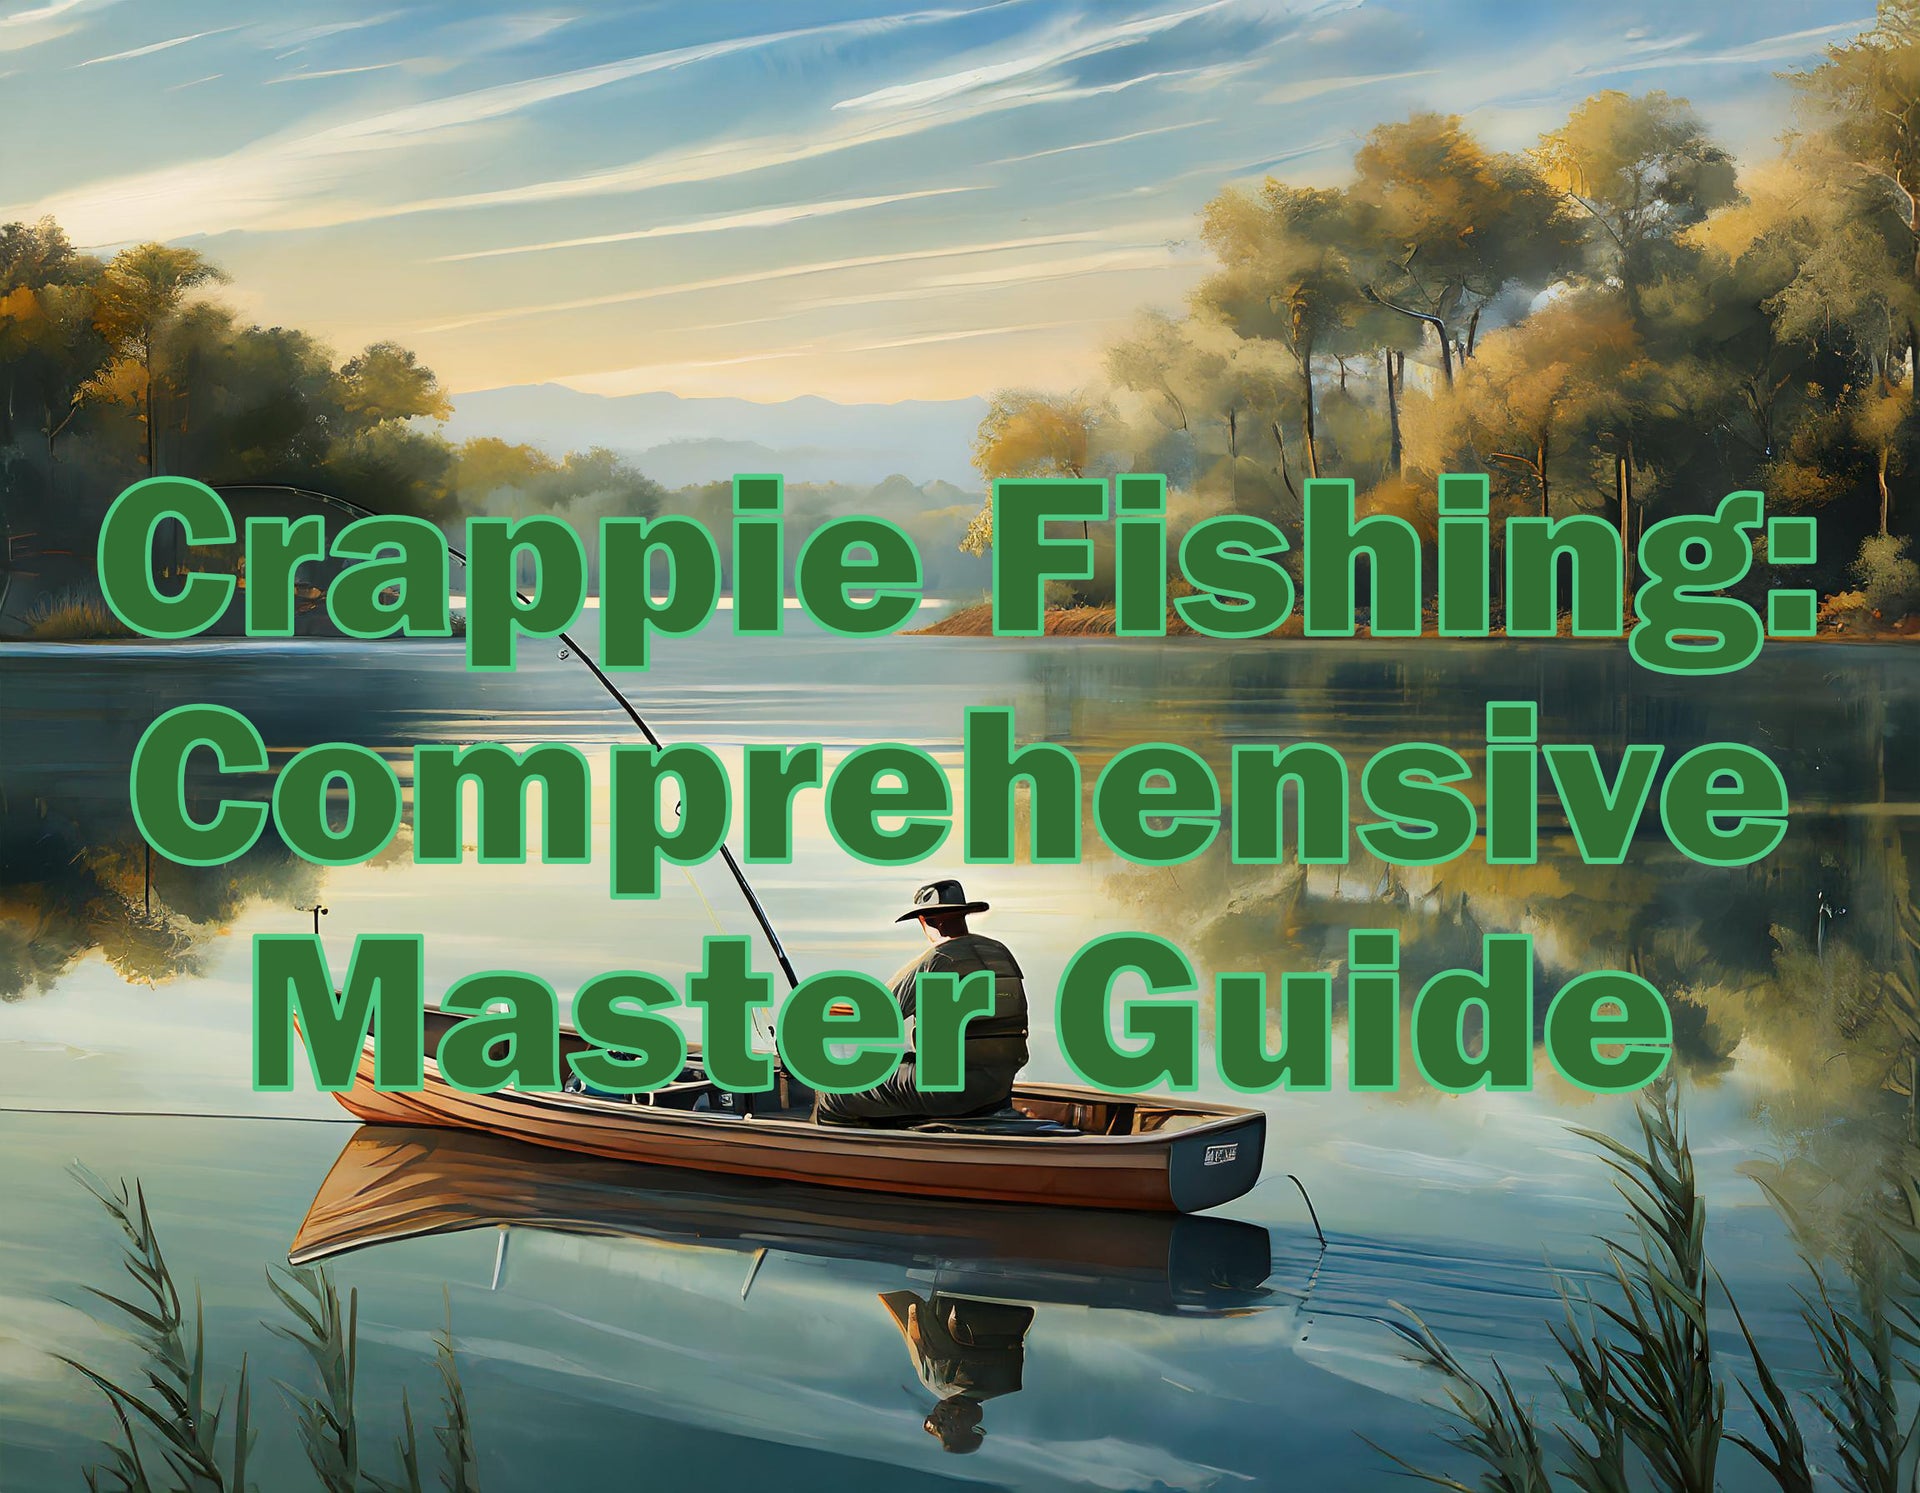 Crappie Fishing: Comprehensive Master Guide – Crappie Co.